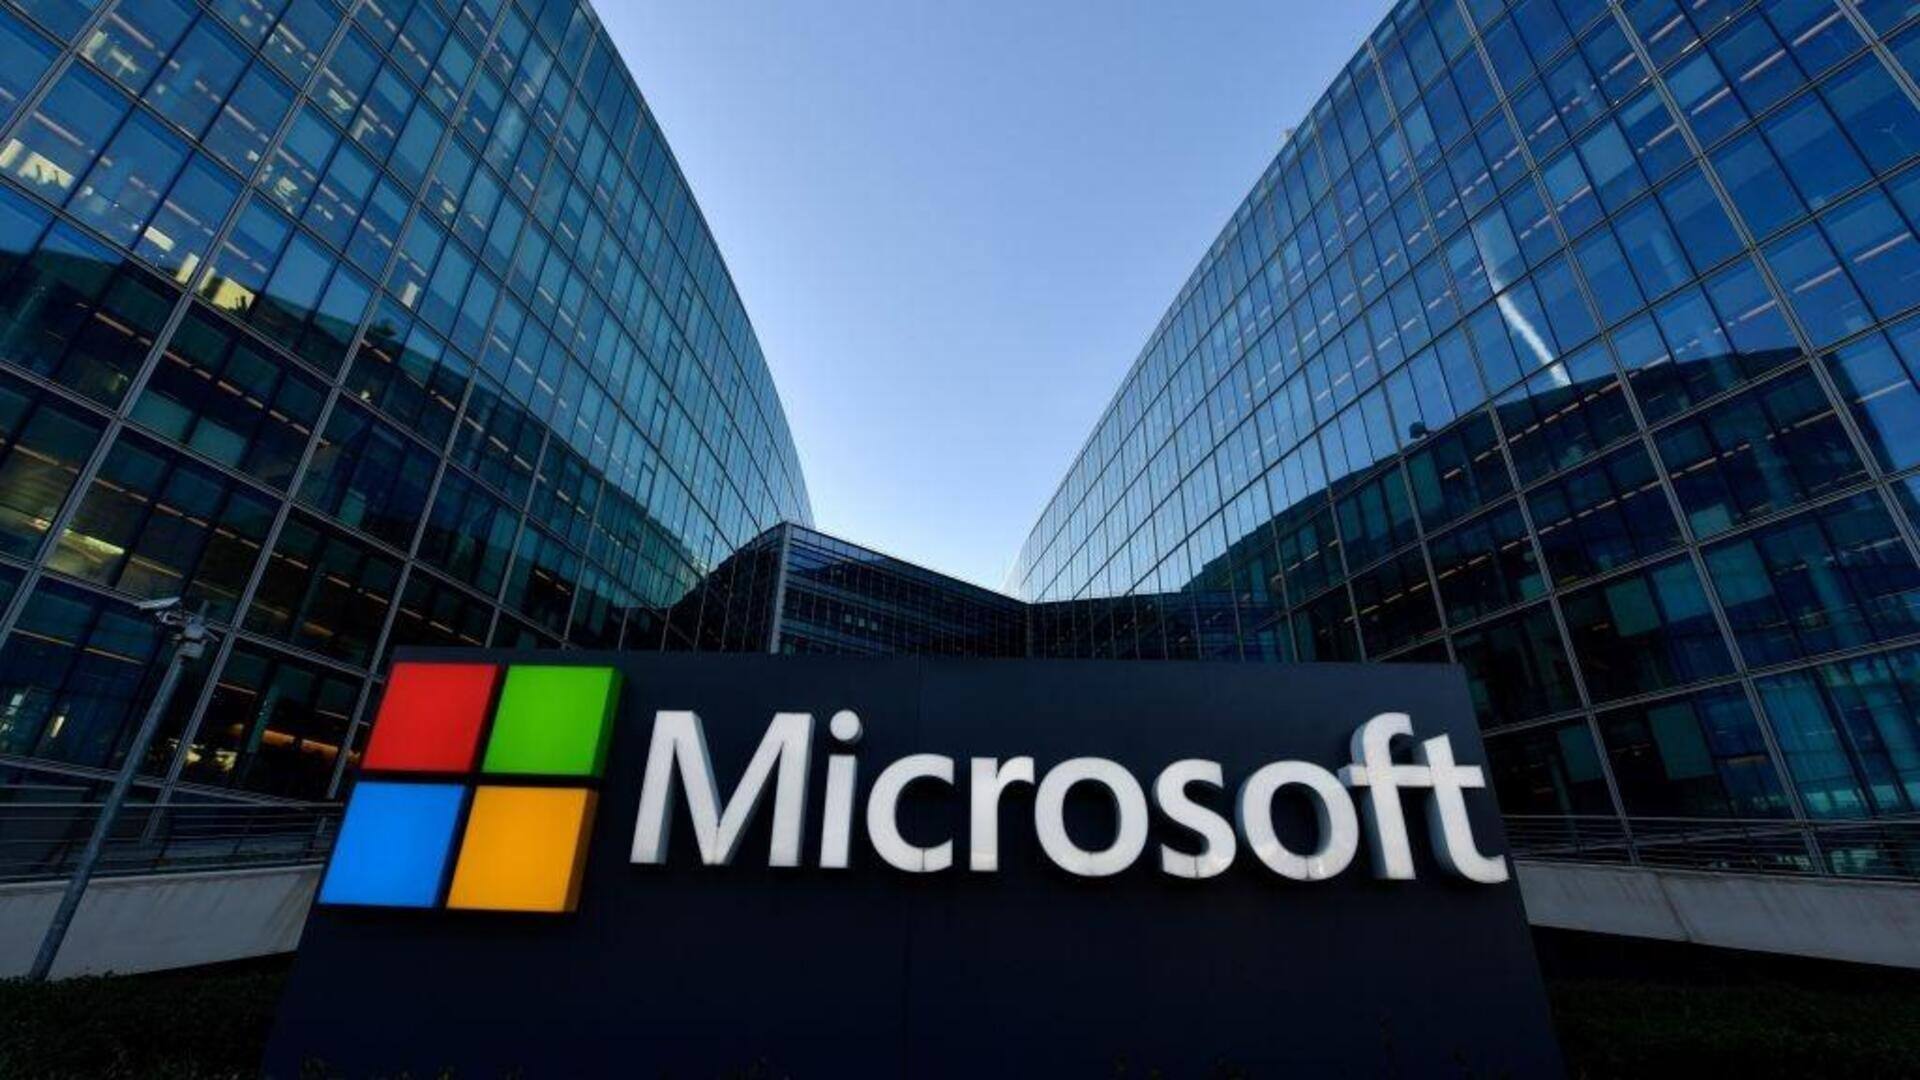 Microsoft signs biggest renewable energy deal ever for AI expansion